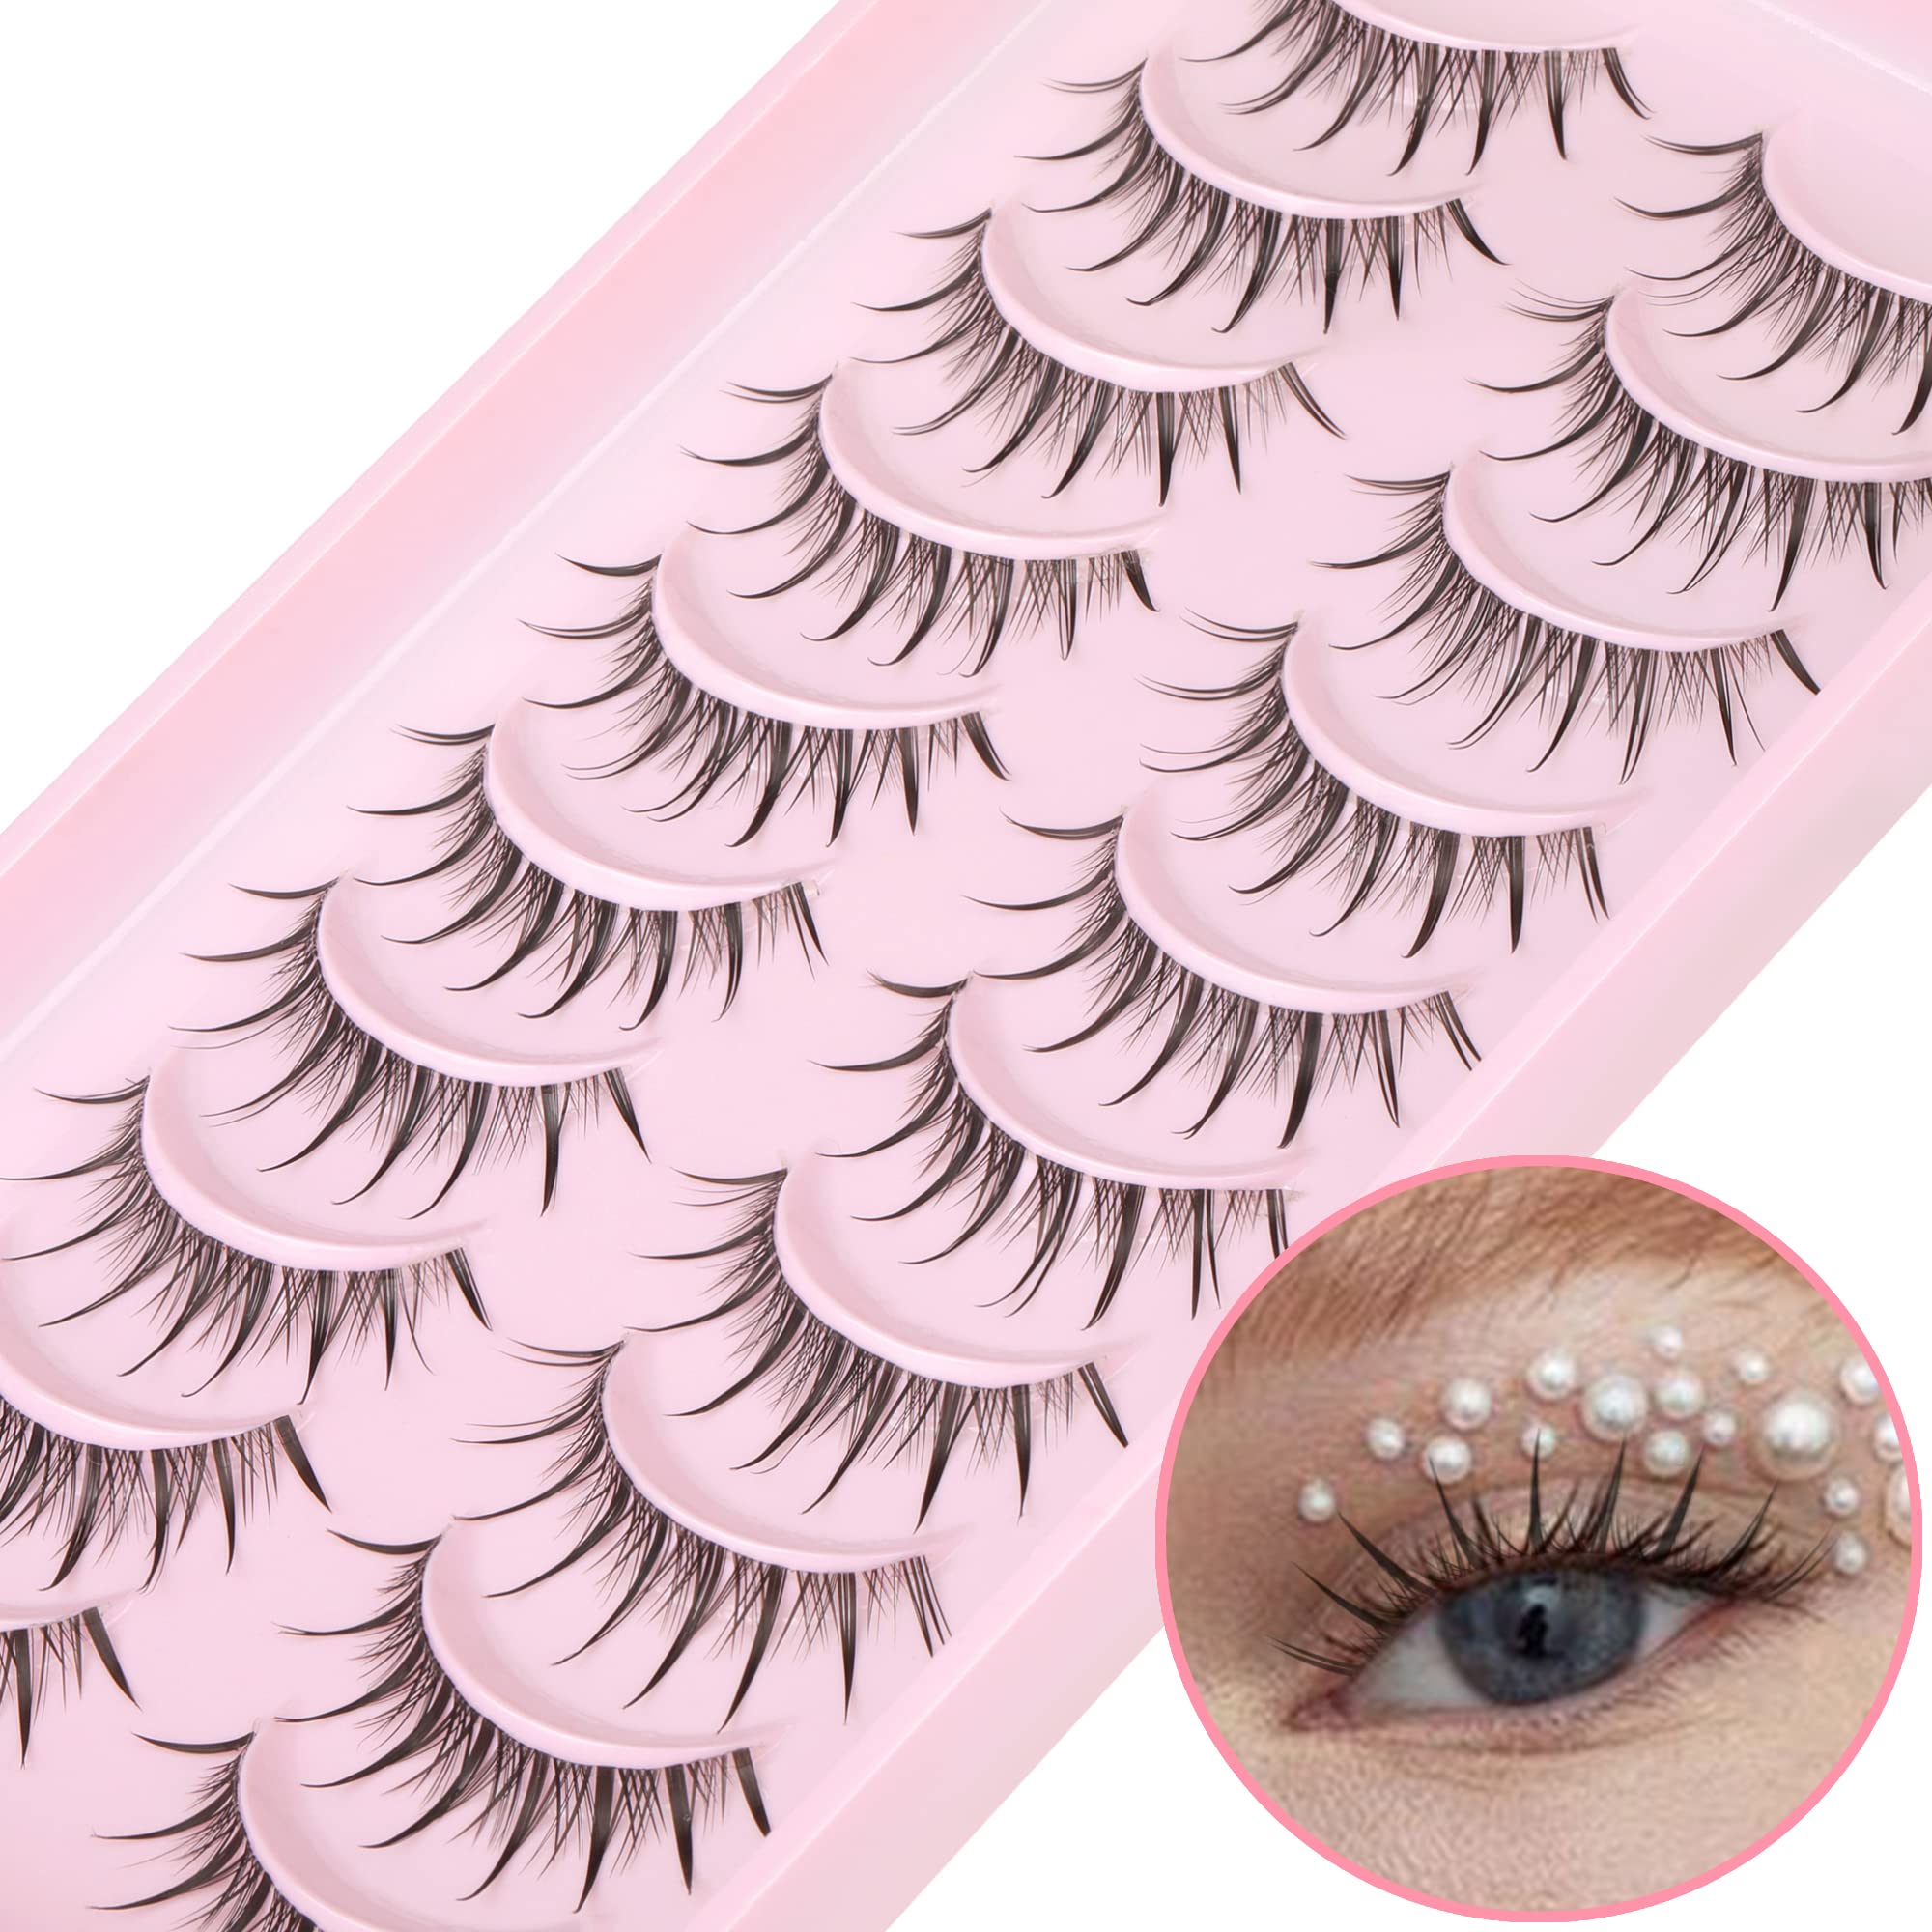 Wispy Lashes Vs Anime Lashes: Which One Is Better?